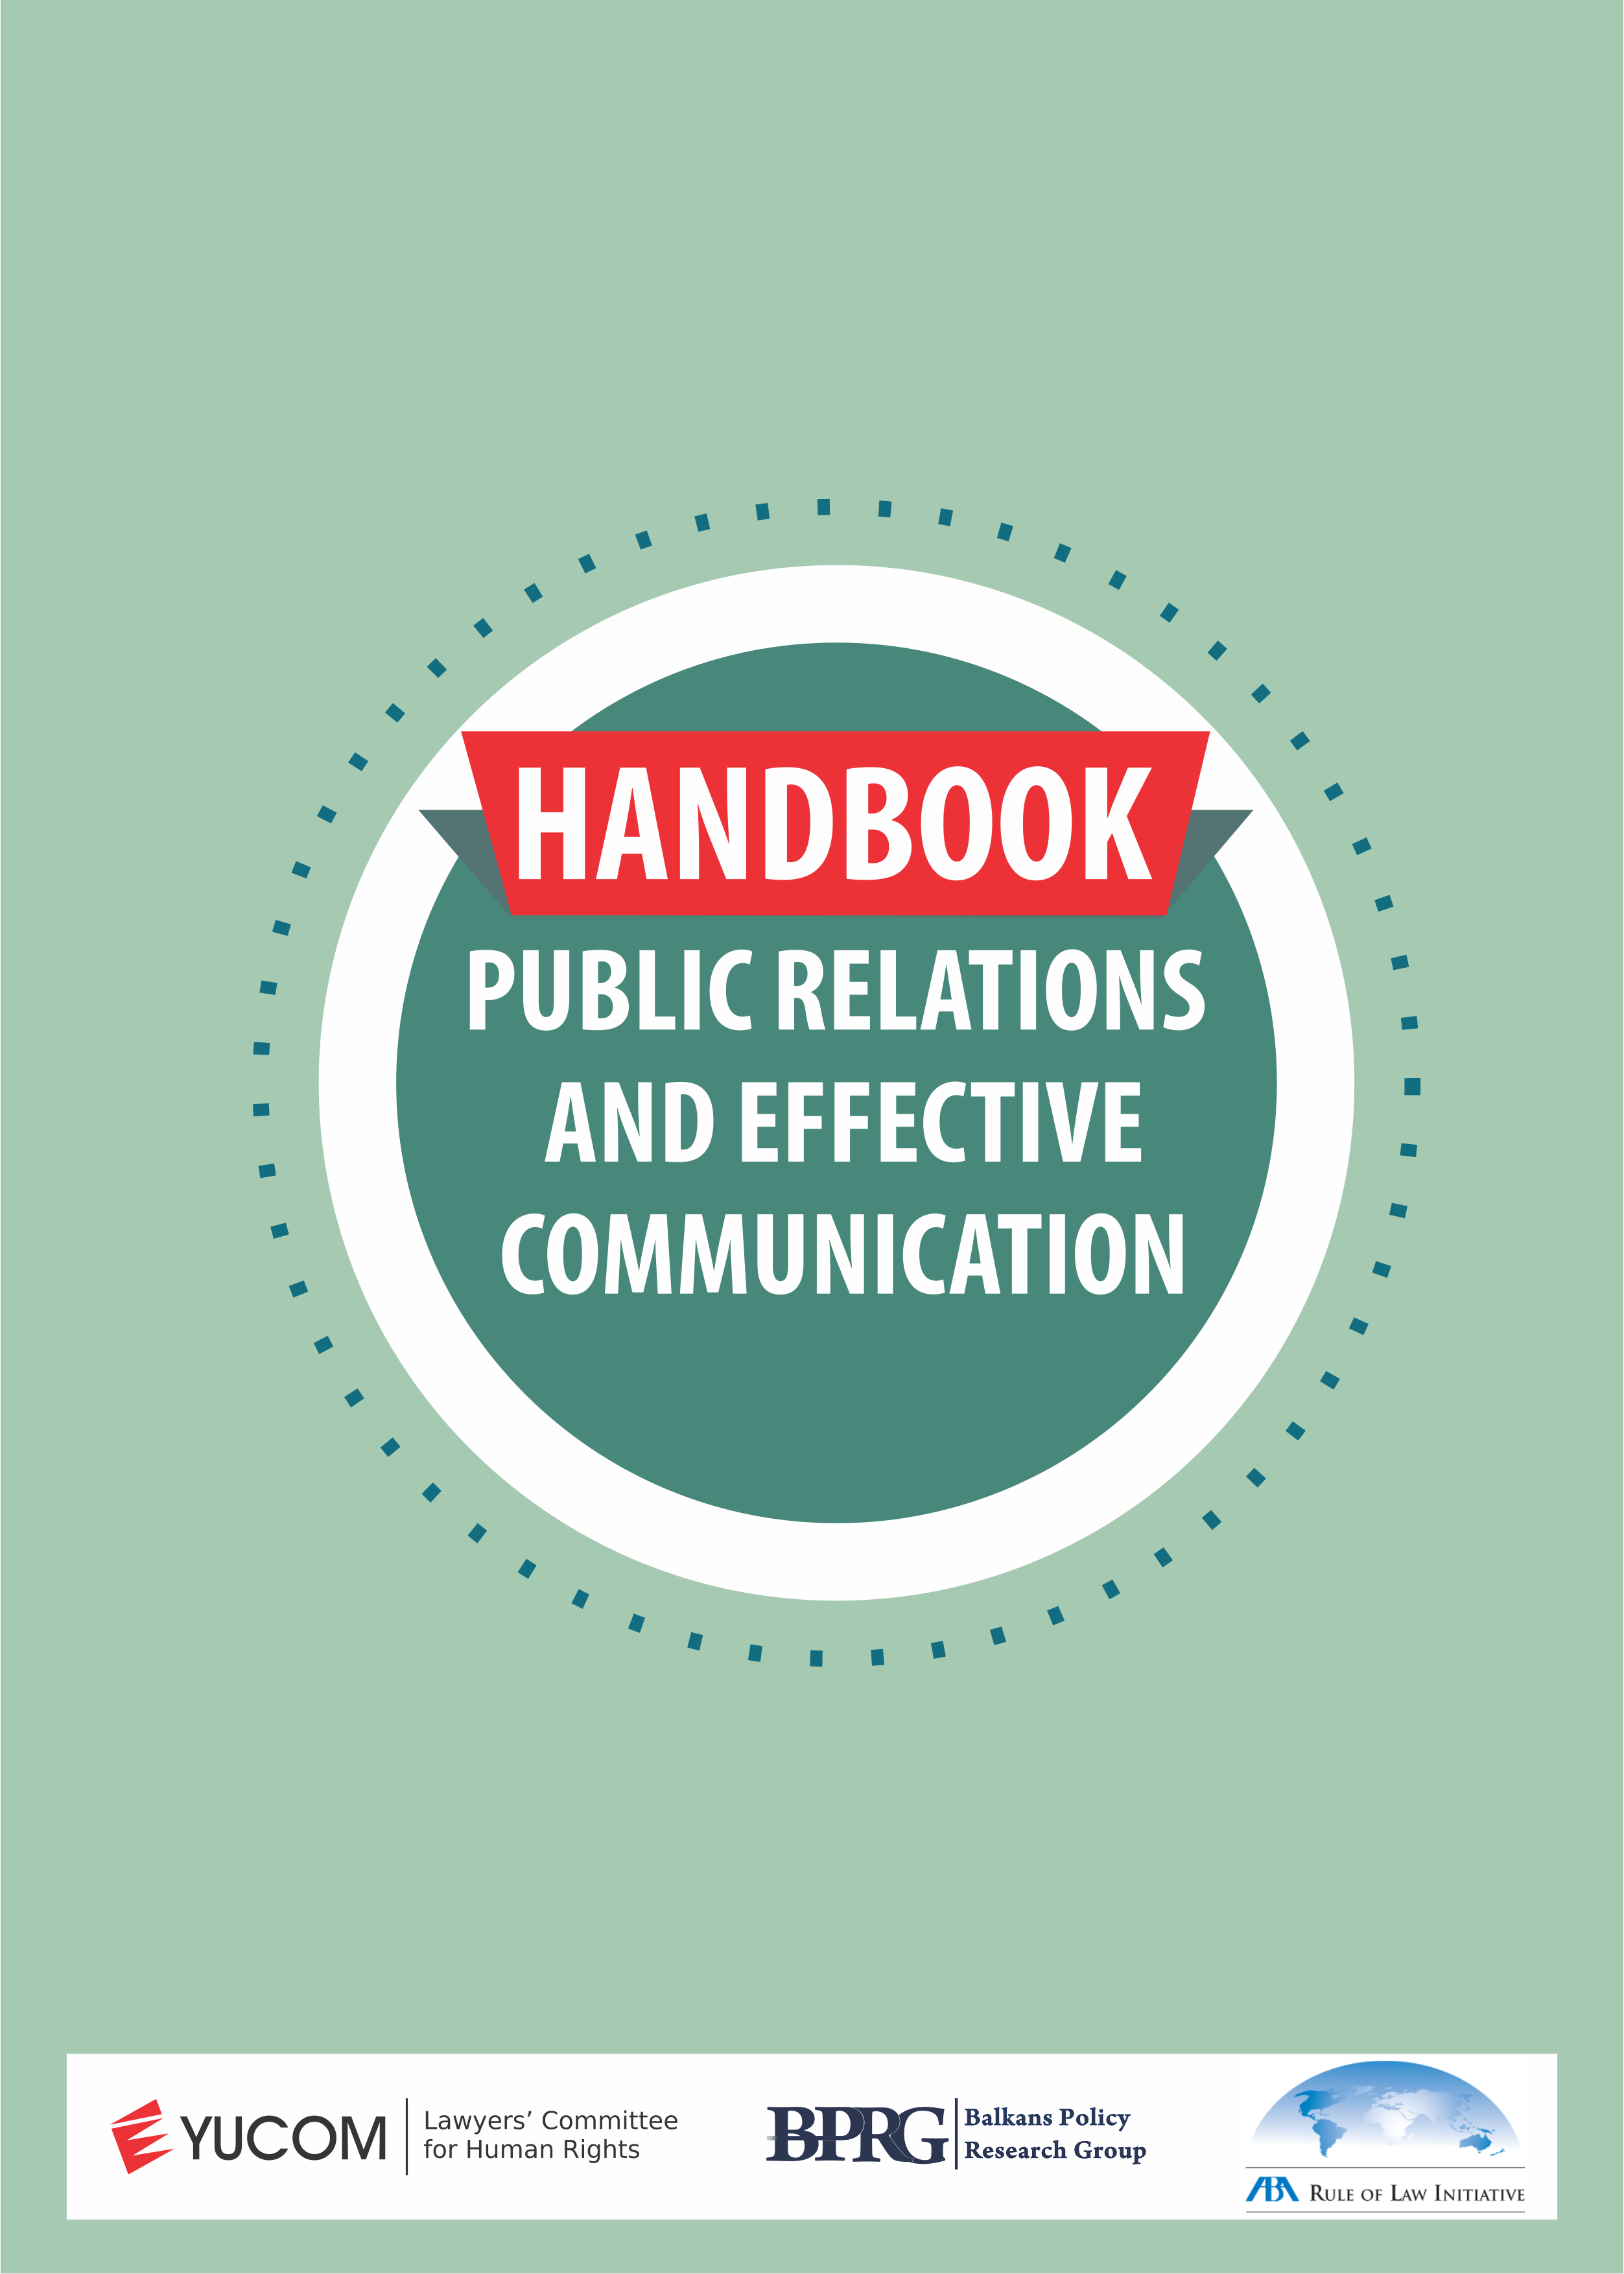 Public Relations and Effective Communication